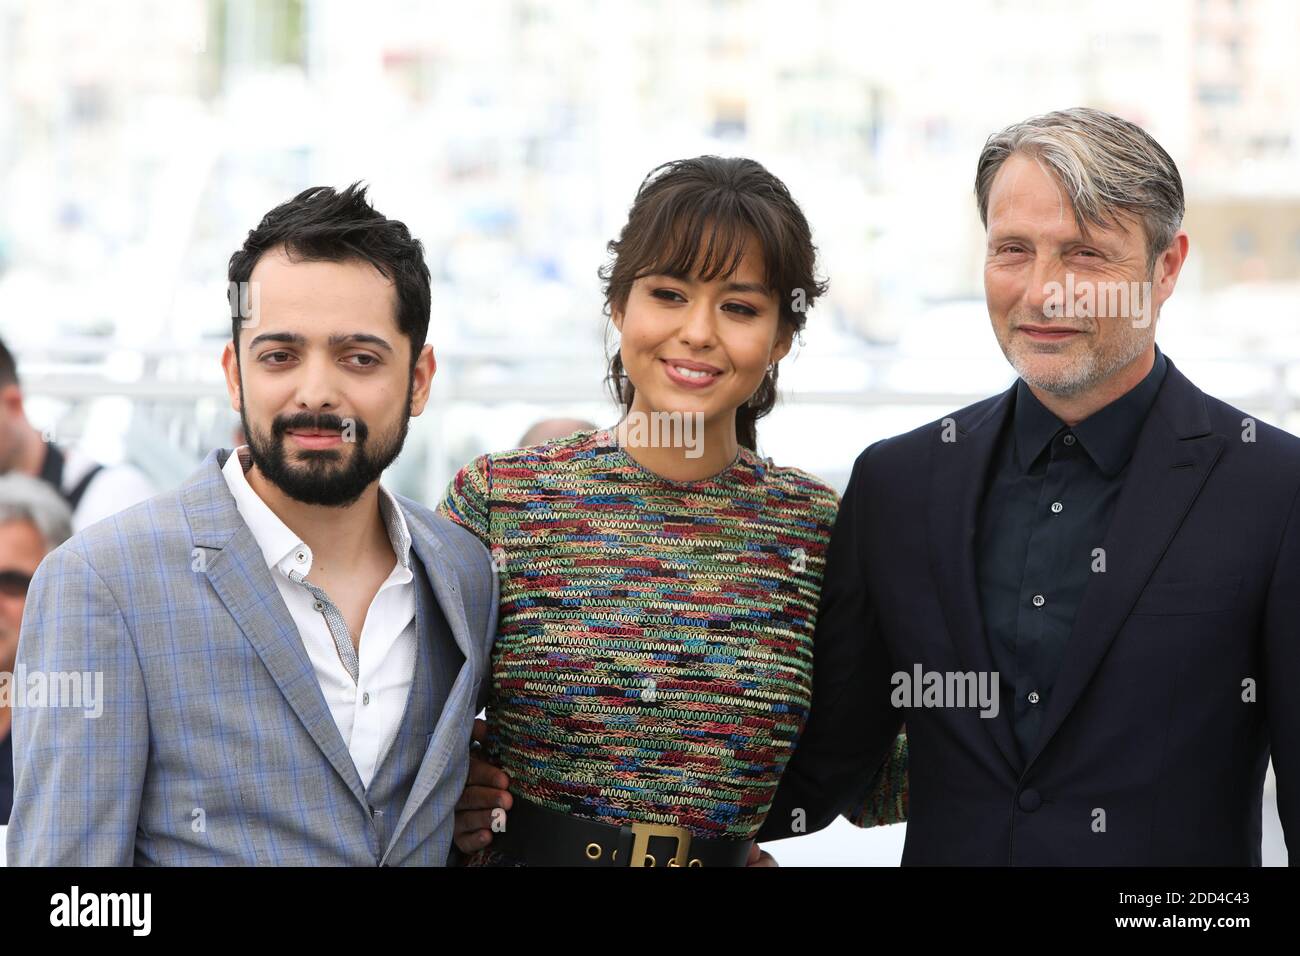 Director Joe Penna, actress Maria Thelma Smaradottir and actor Mads  Mikkelsen attend the photocall for 'Arctic' during the 71st annual Cannes  Film Festival at Palais des Festivals on May 10, 2018 in